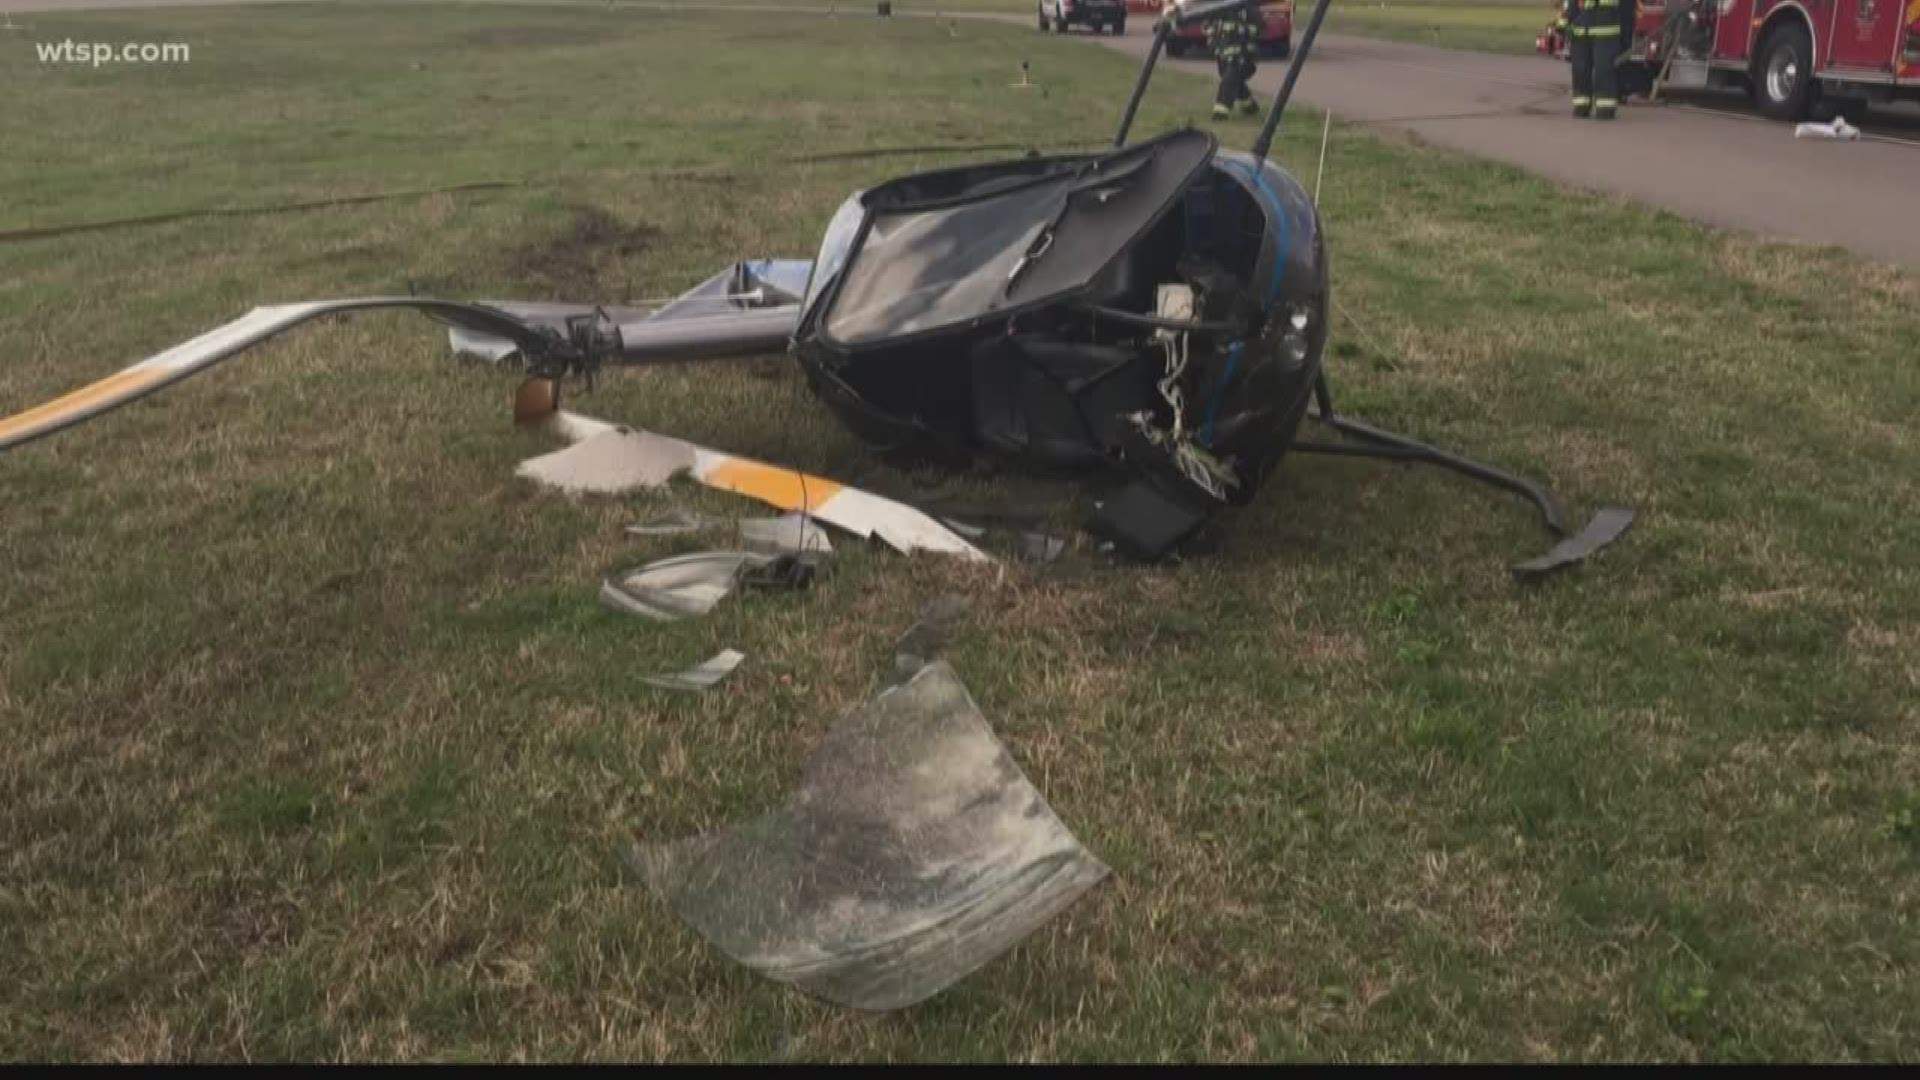 Two people received minor injuries when the aircraft crashed.